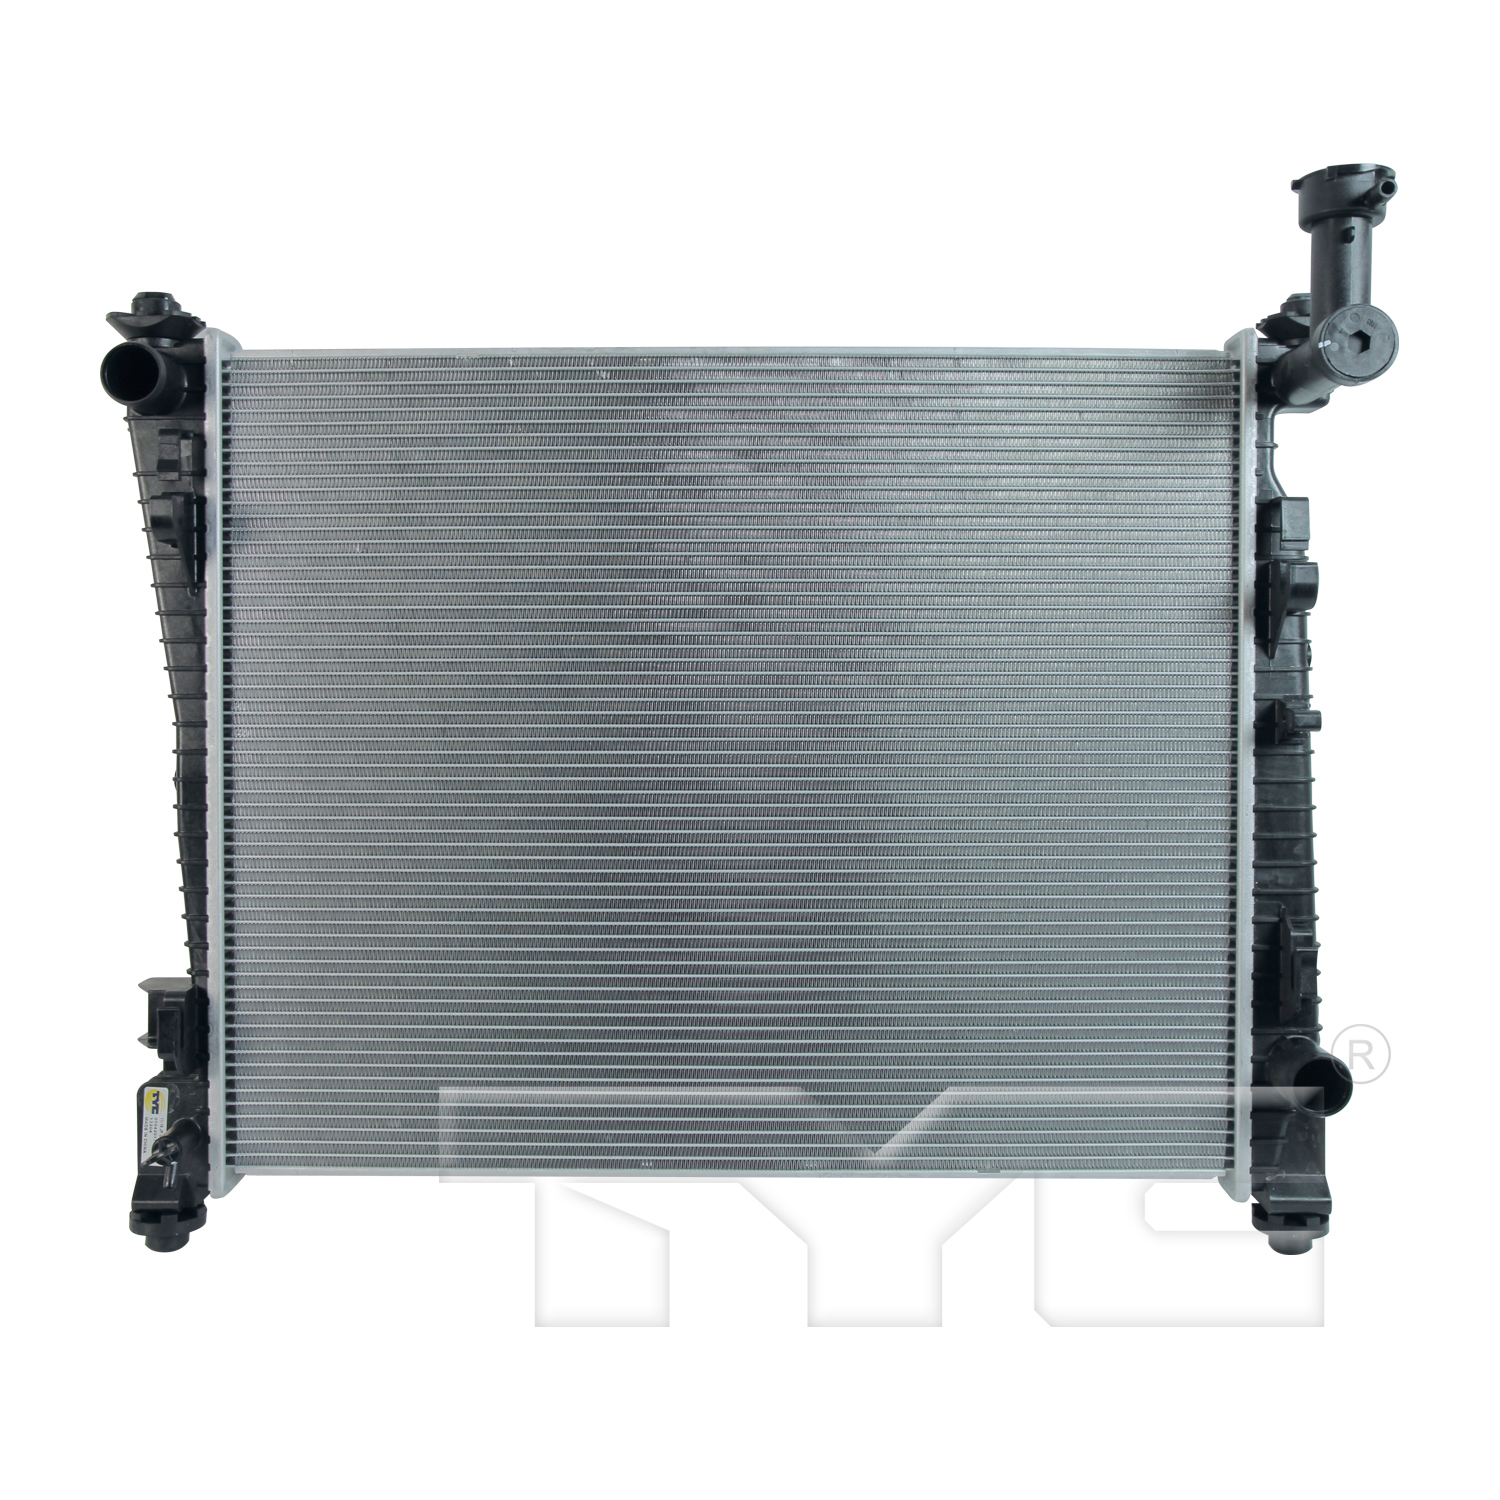 Aftermarket RADIATORS for JEEP - GRAND CHEROKEE, GRAND CHEROKEE,11-21,Radiator assembly